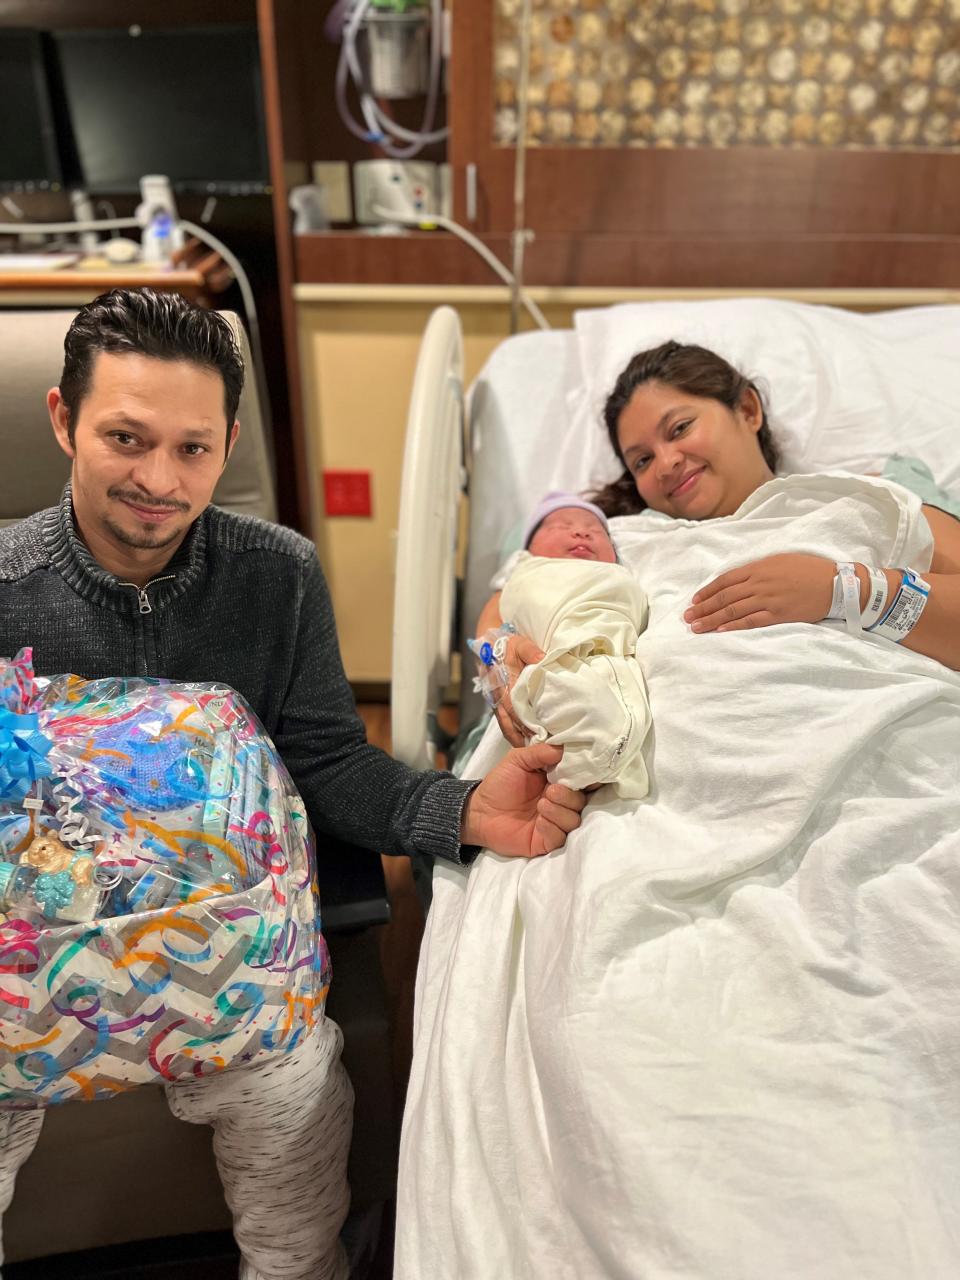 Ingris Posada Esquivel, right, and Jose Molina-Avillatoro of Brook, Ind., welcomed Jose Molina-Avillatoro, Jr., born at Franciscan Health Birth Center, Lafayette, Ind., at 3:46 p.m. on New Year's Day. The baby weighed 8 lbs., 11.7 oz.